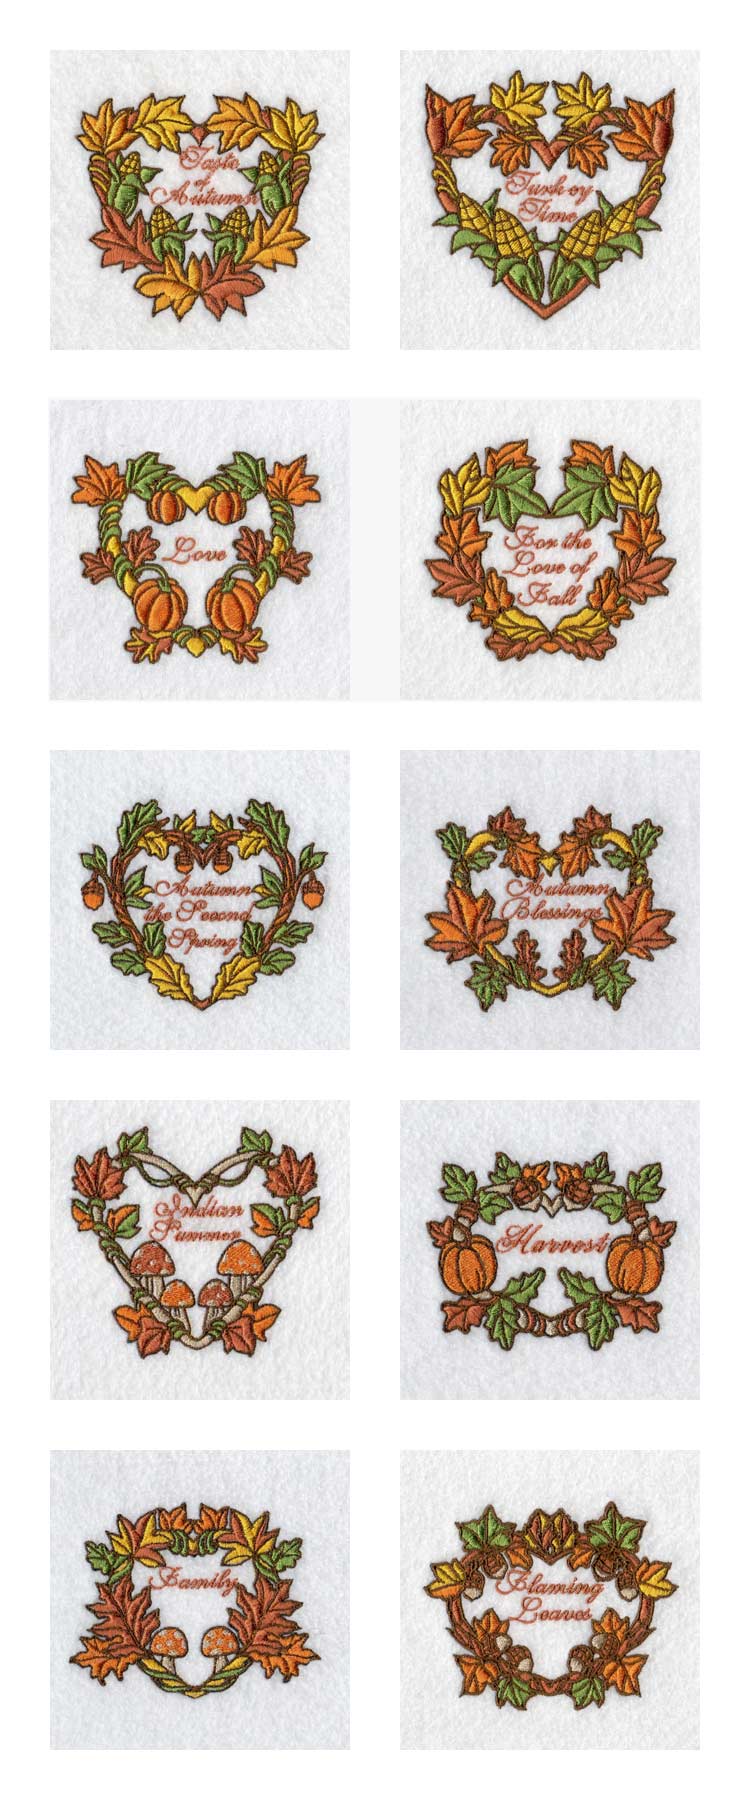 For The Love of Fall Embroidery Machine Design Details